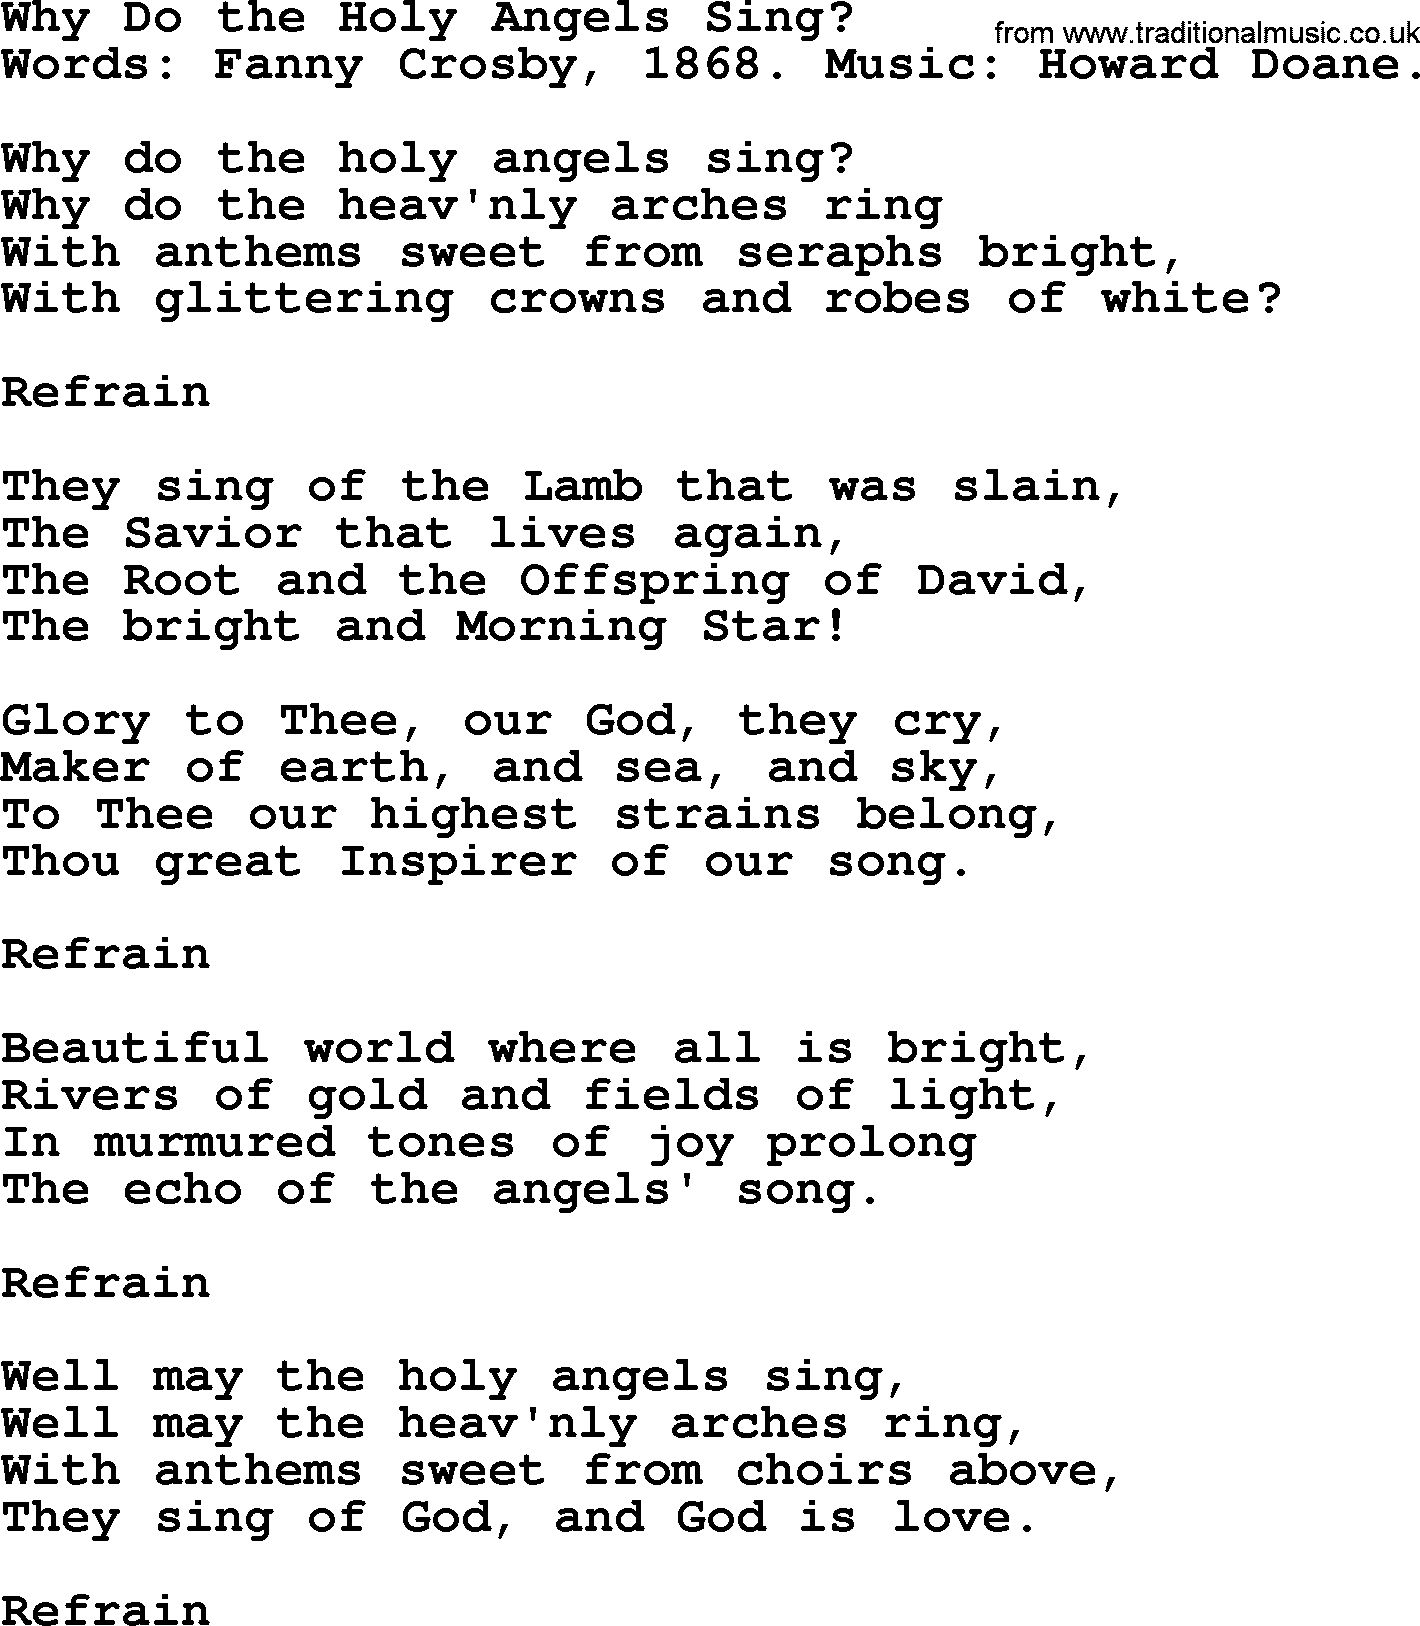 Fanny Crosby song: Why Do The Holy Angels Sing, lyrics